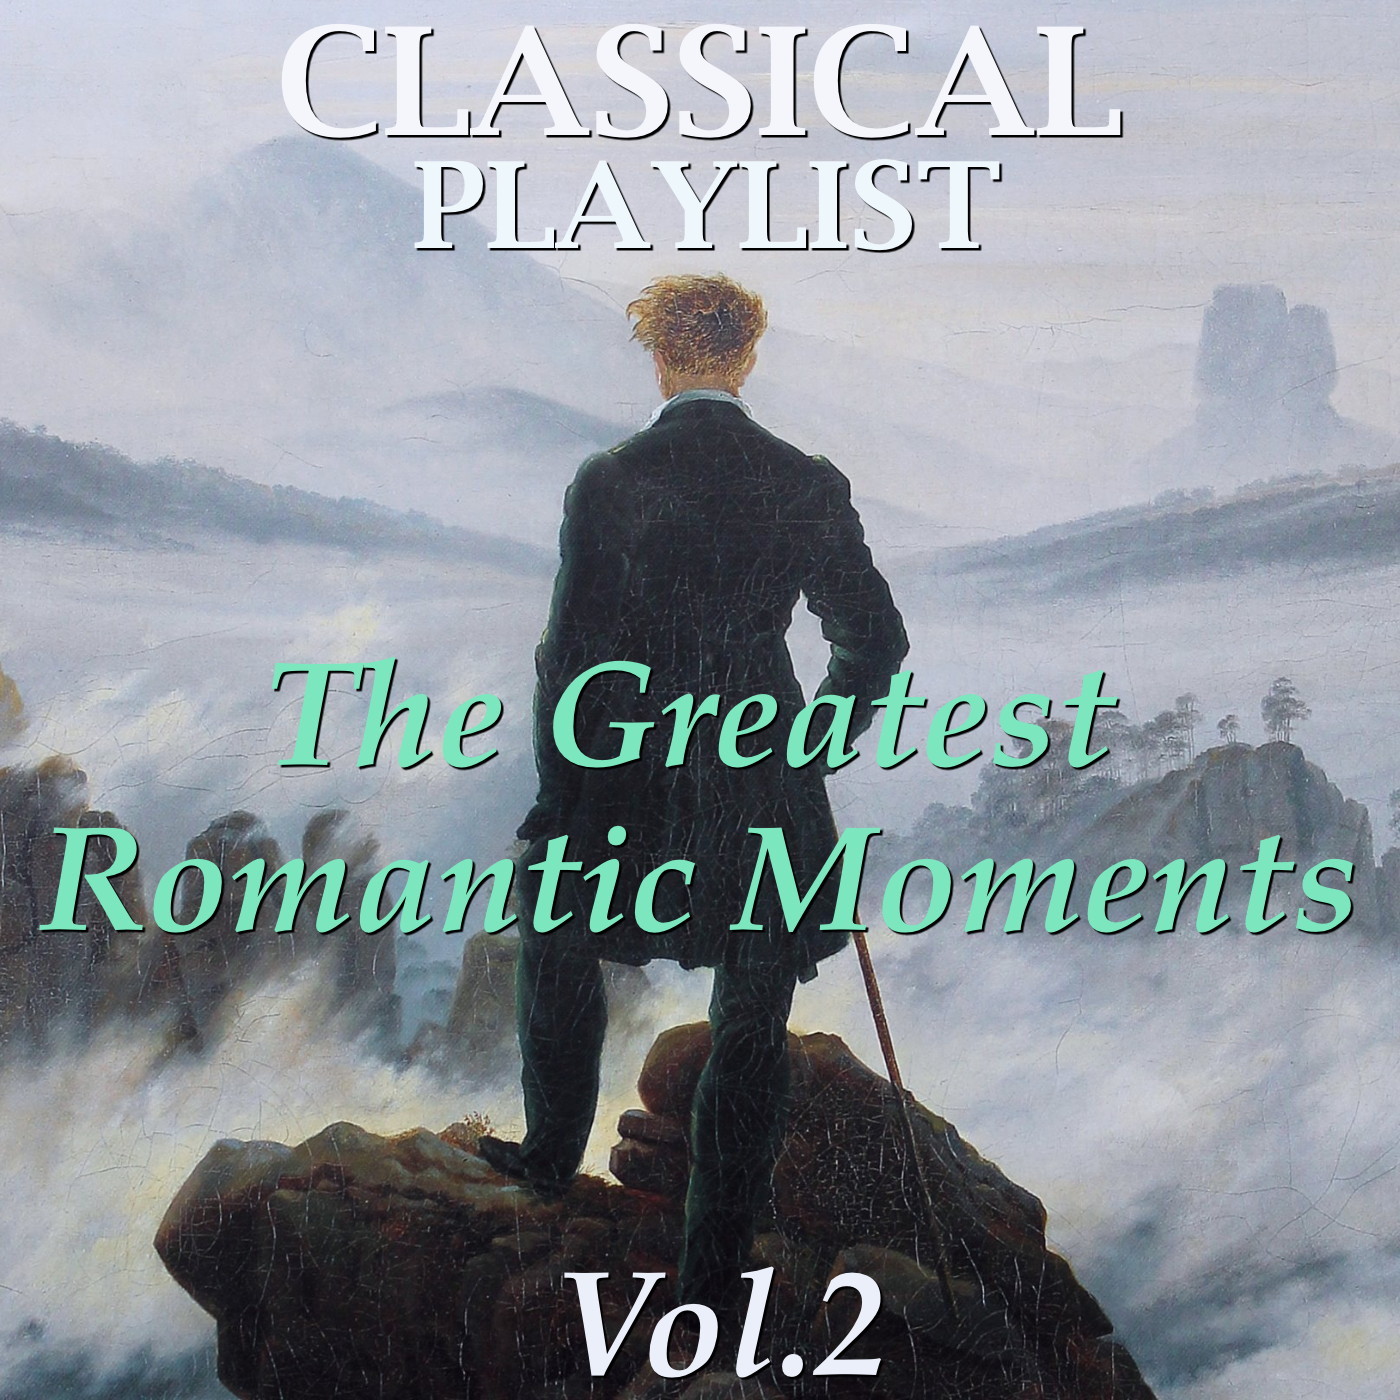 Classical Playlist: The Greatest Romantic Moments, Vol. 2